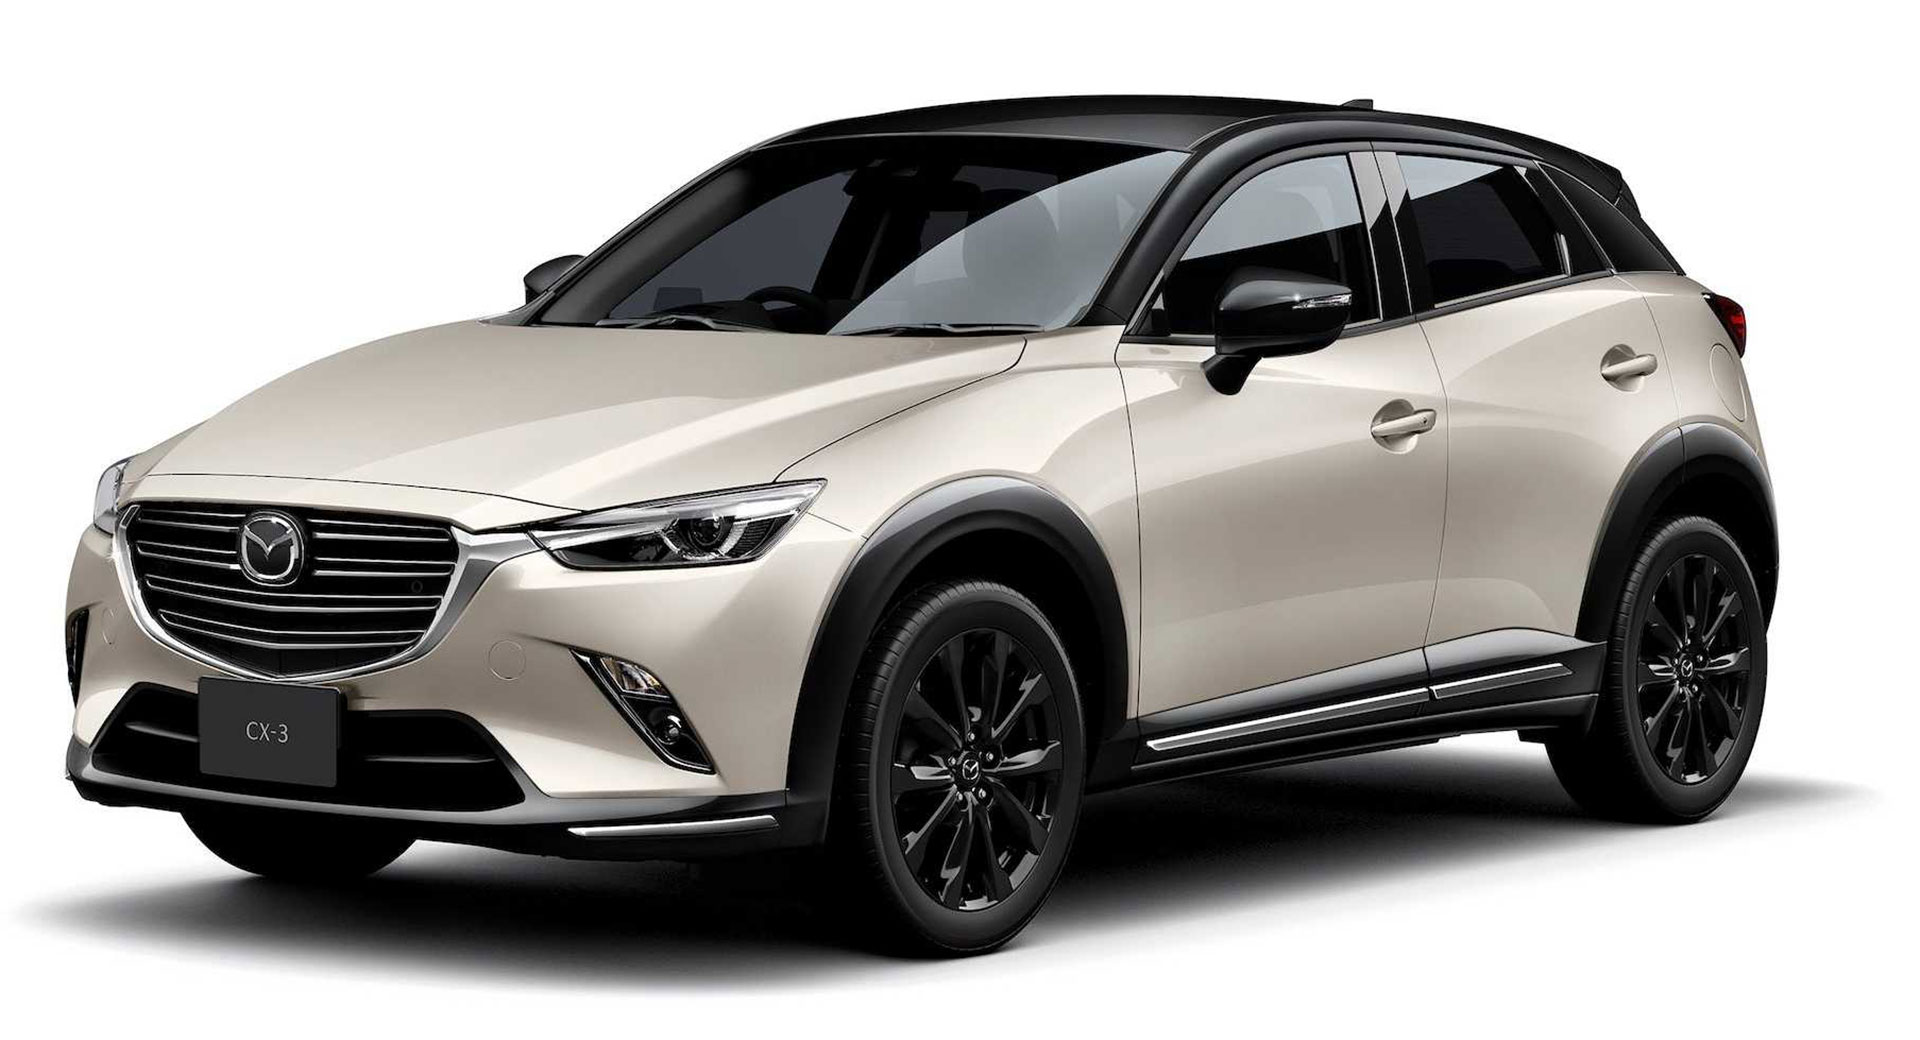 Mazda CX-3 Gets An Edge In Japan With New 'Super Edgy' Variant | Carscoops